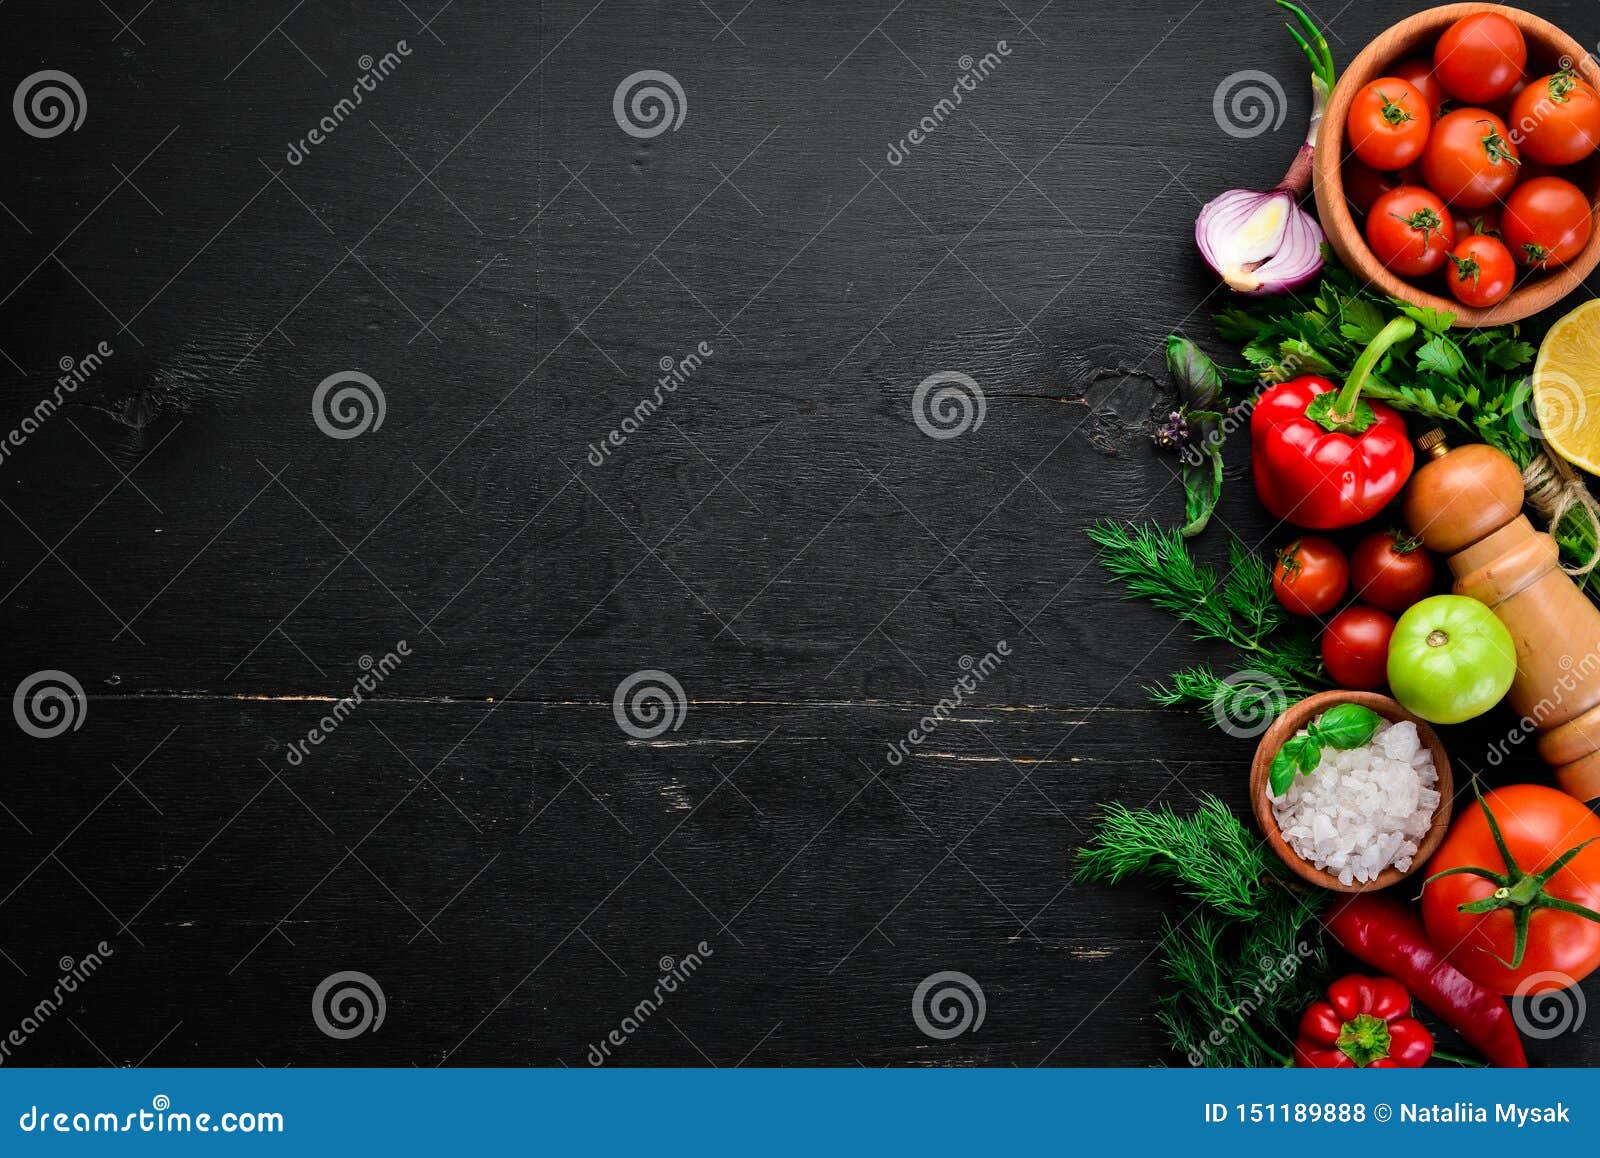 Vegetable Background. Fresh Tomatoes, Paprika, Onions and Parsley on ...